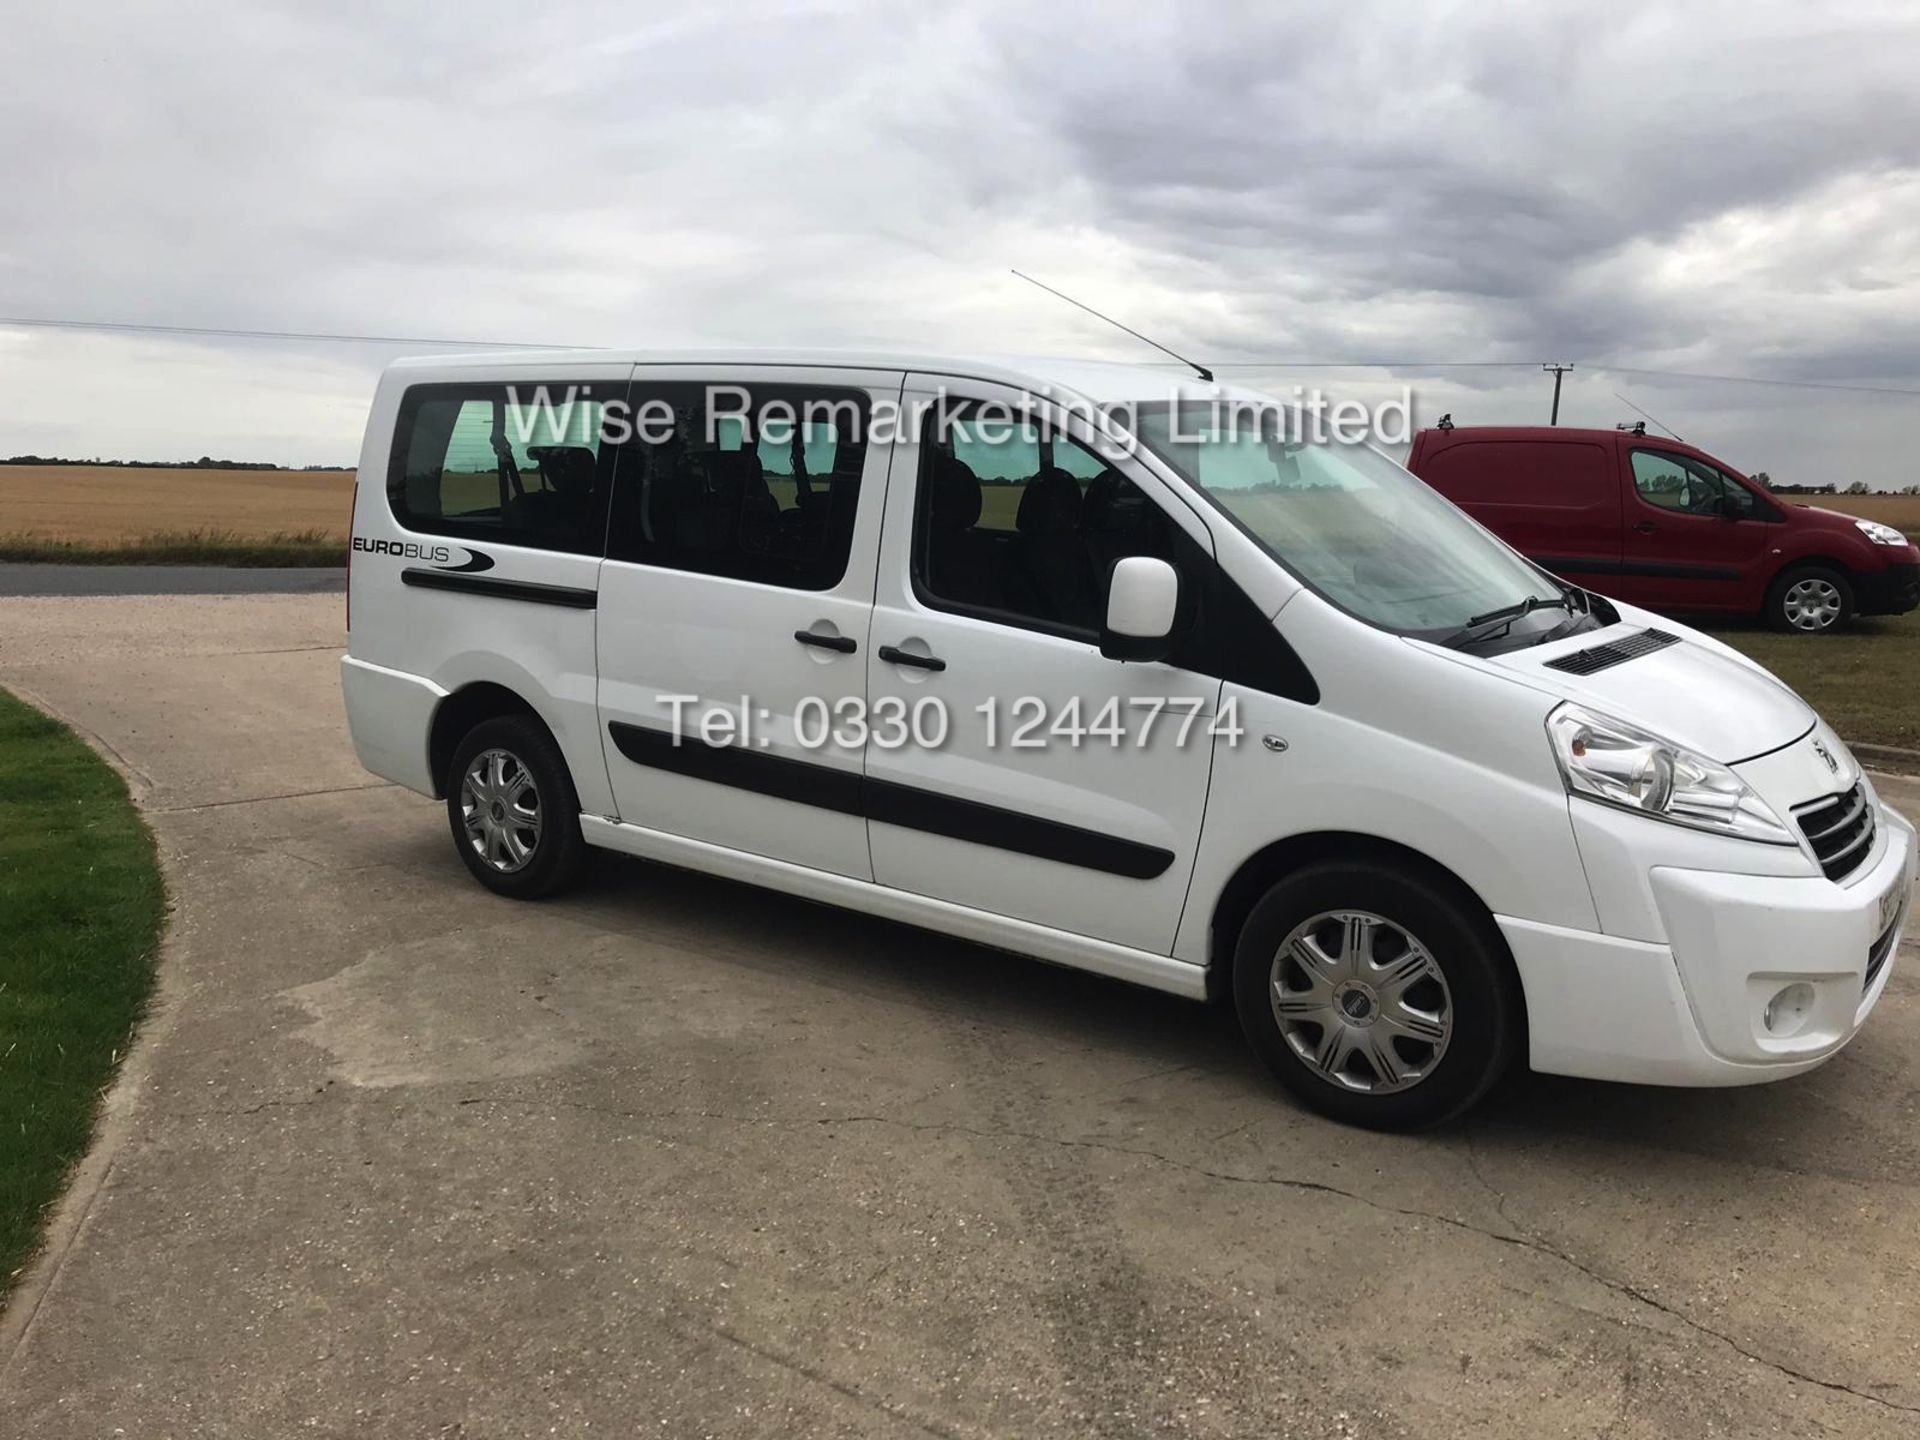 PEUGEOT EUROBUS S *MPV 8 SEATER* 2.0l (2013 - 13 REG) **AIR CON** - 1 OWNER FROM NEW - Image 6 of 19